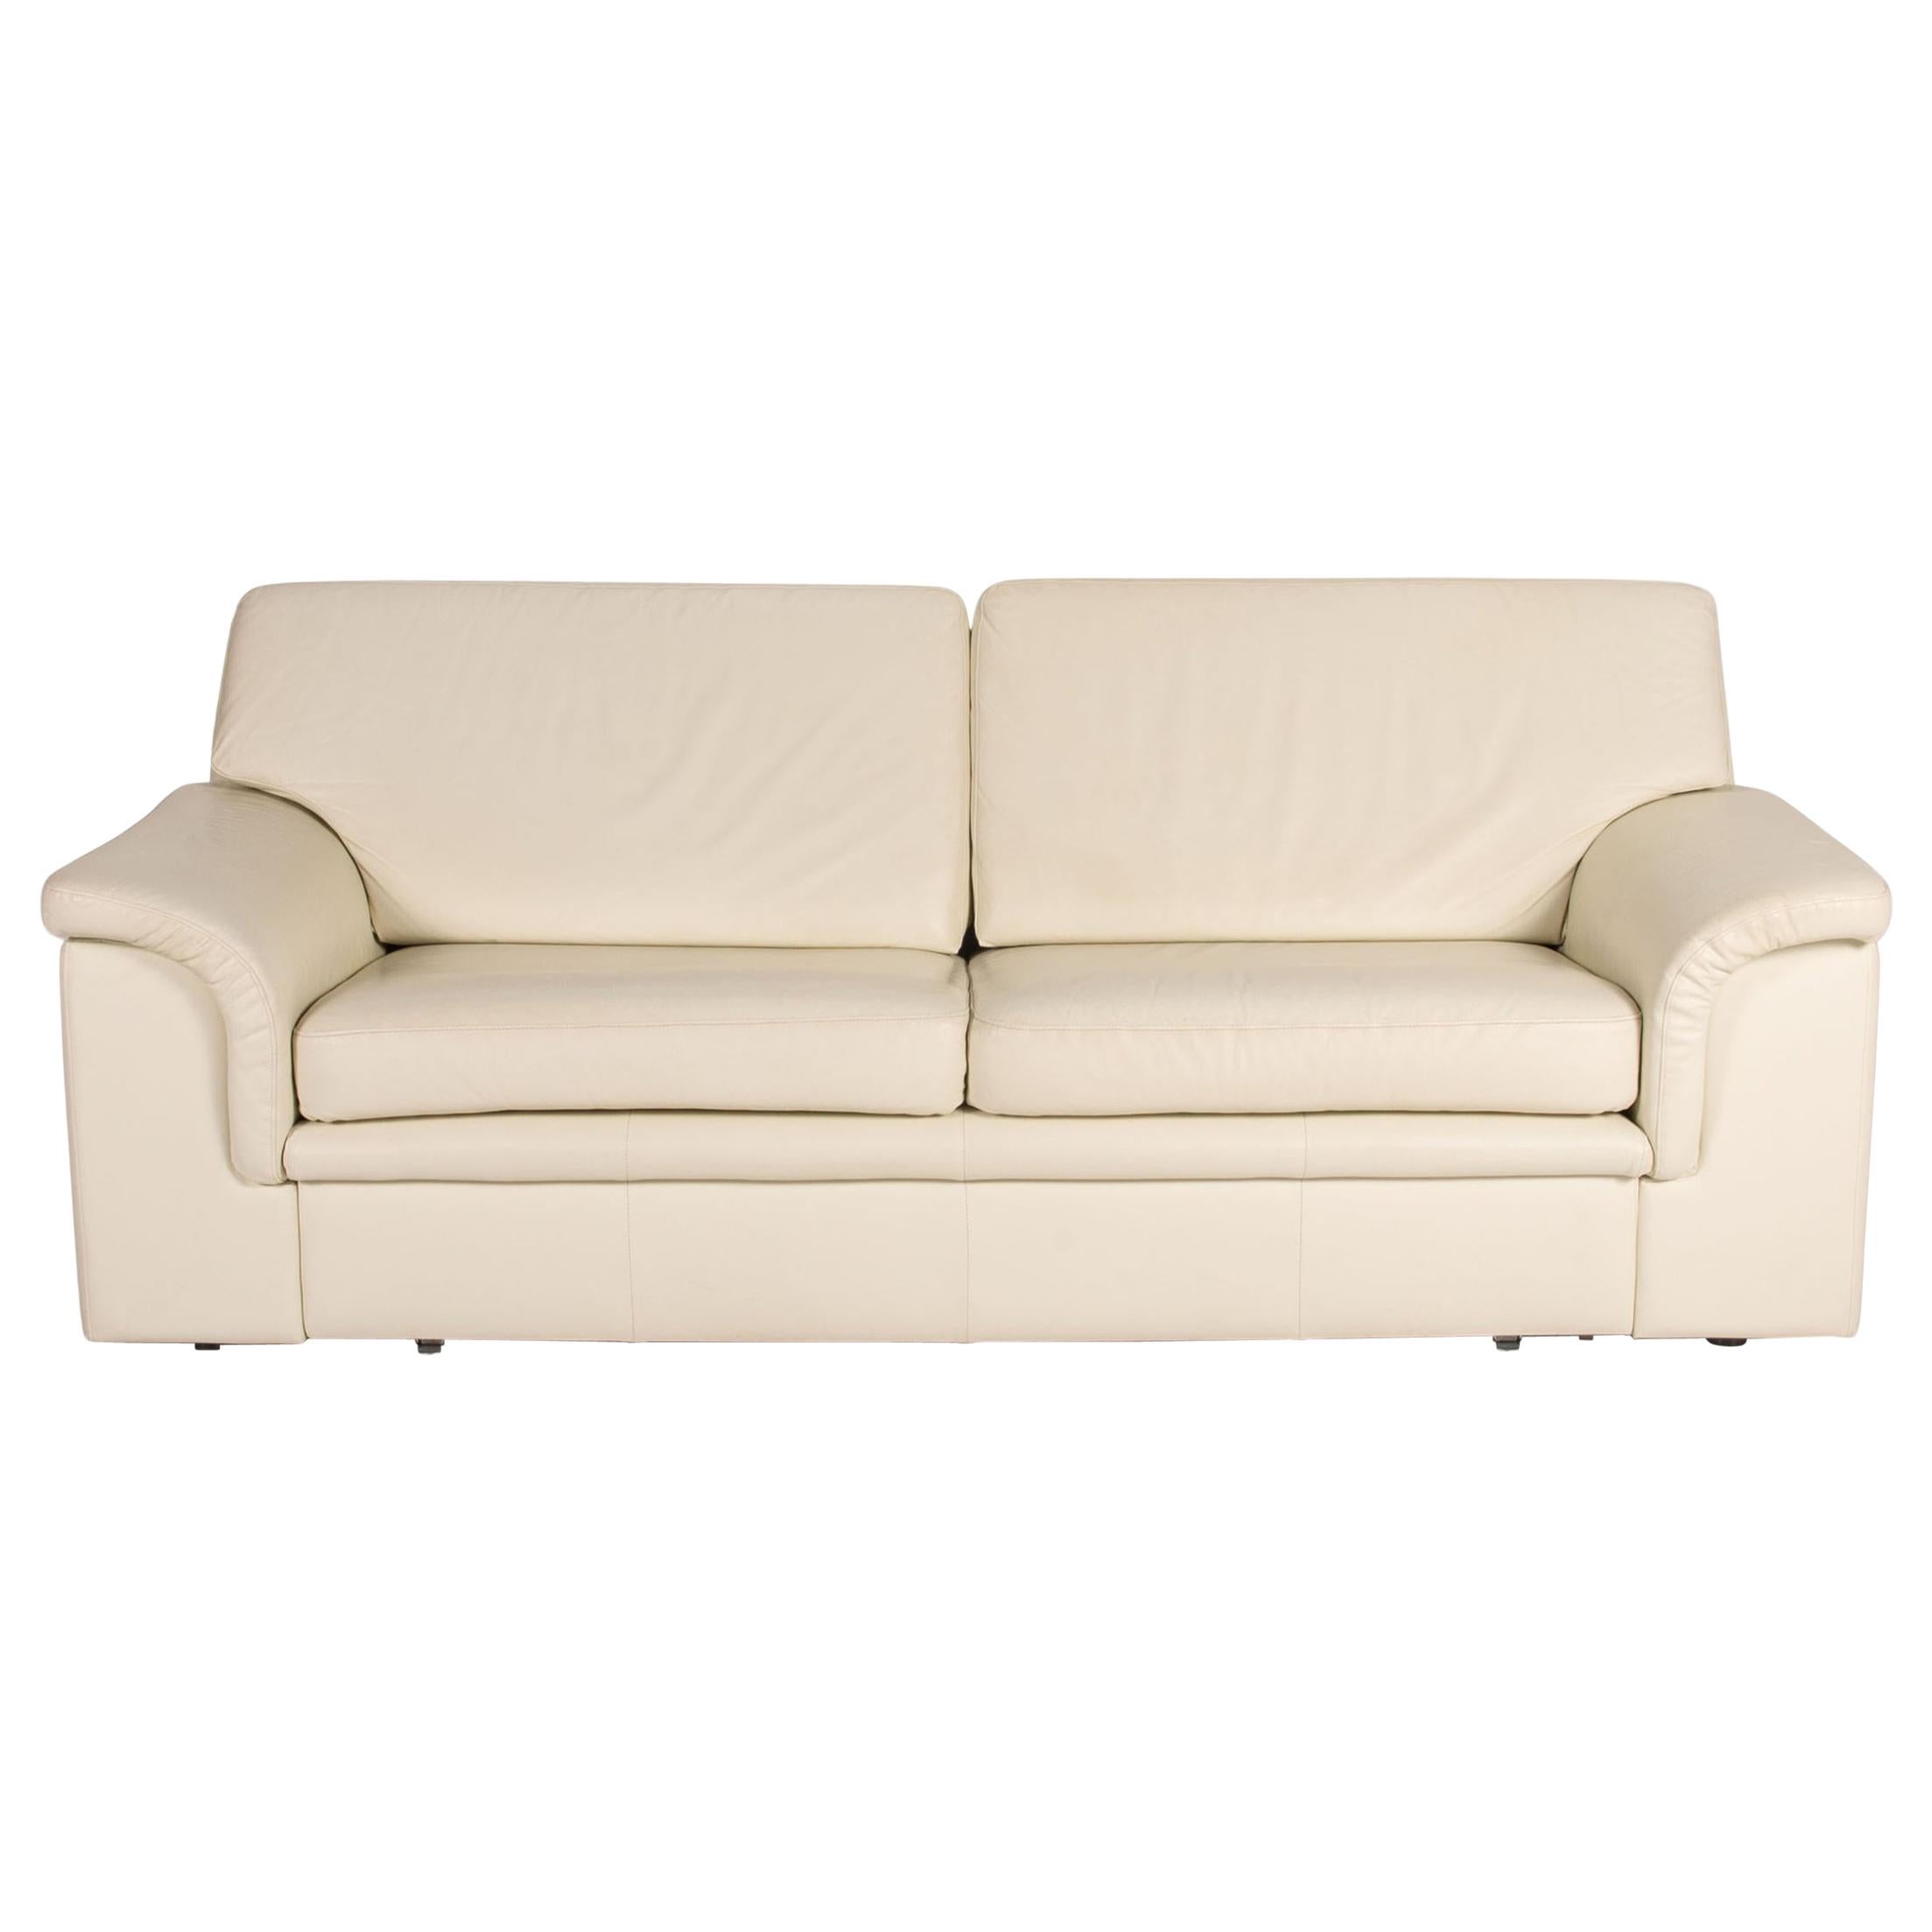 Musterring Leather Sofa Bed Cream Two-Seater Function Sleeping Function Couch For Sale